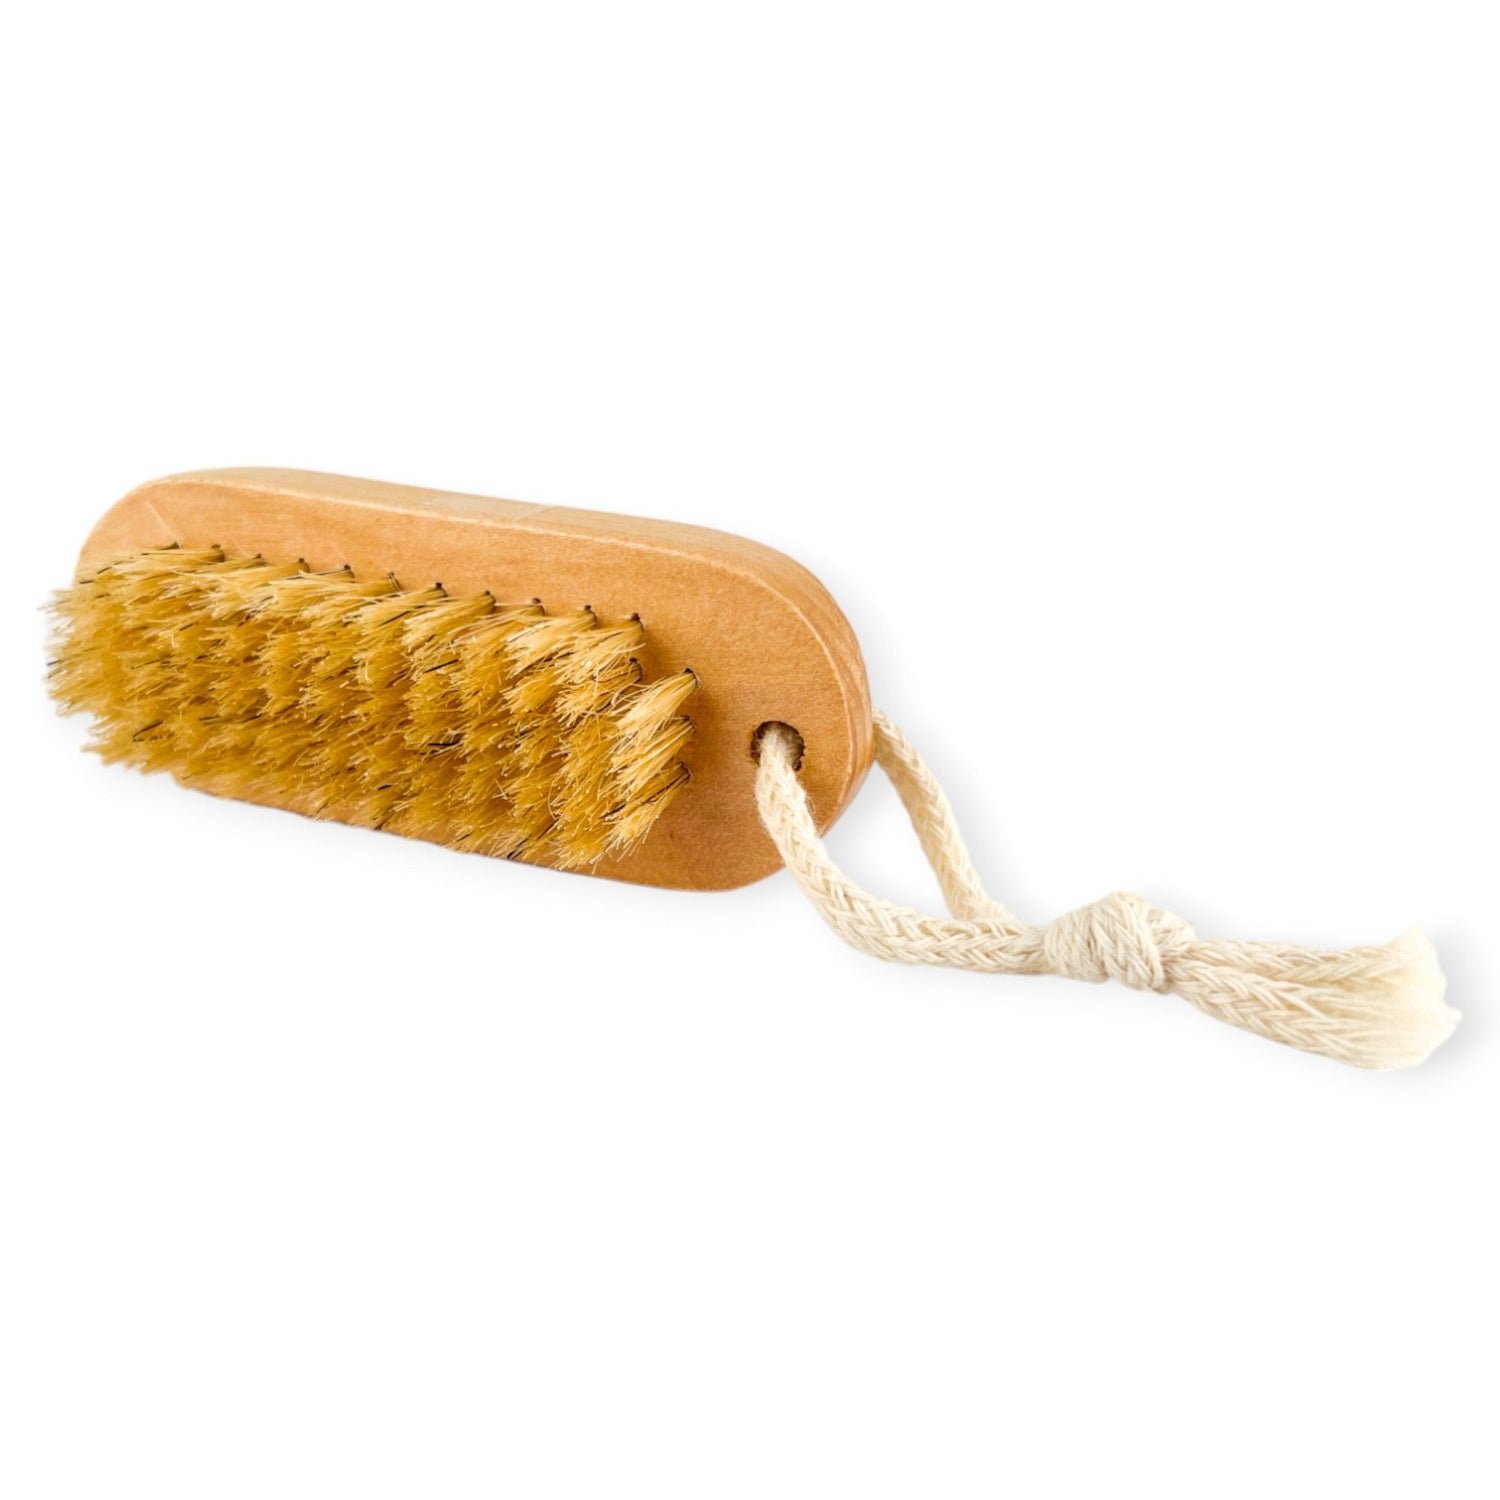 Wooden Nail Brush - Old Town Soap Co.